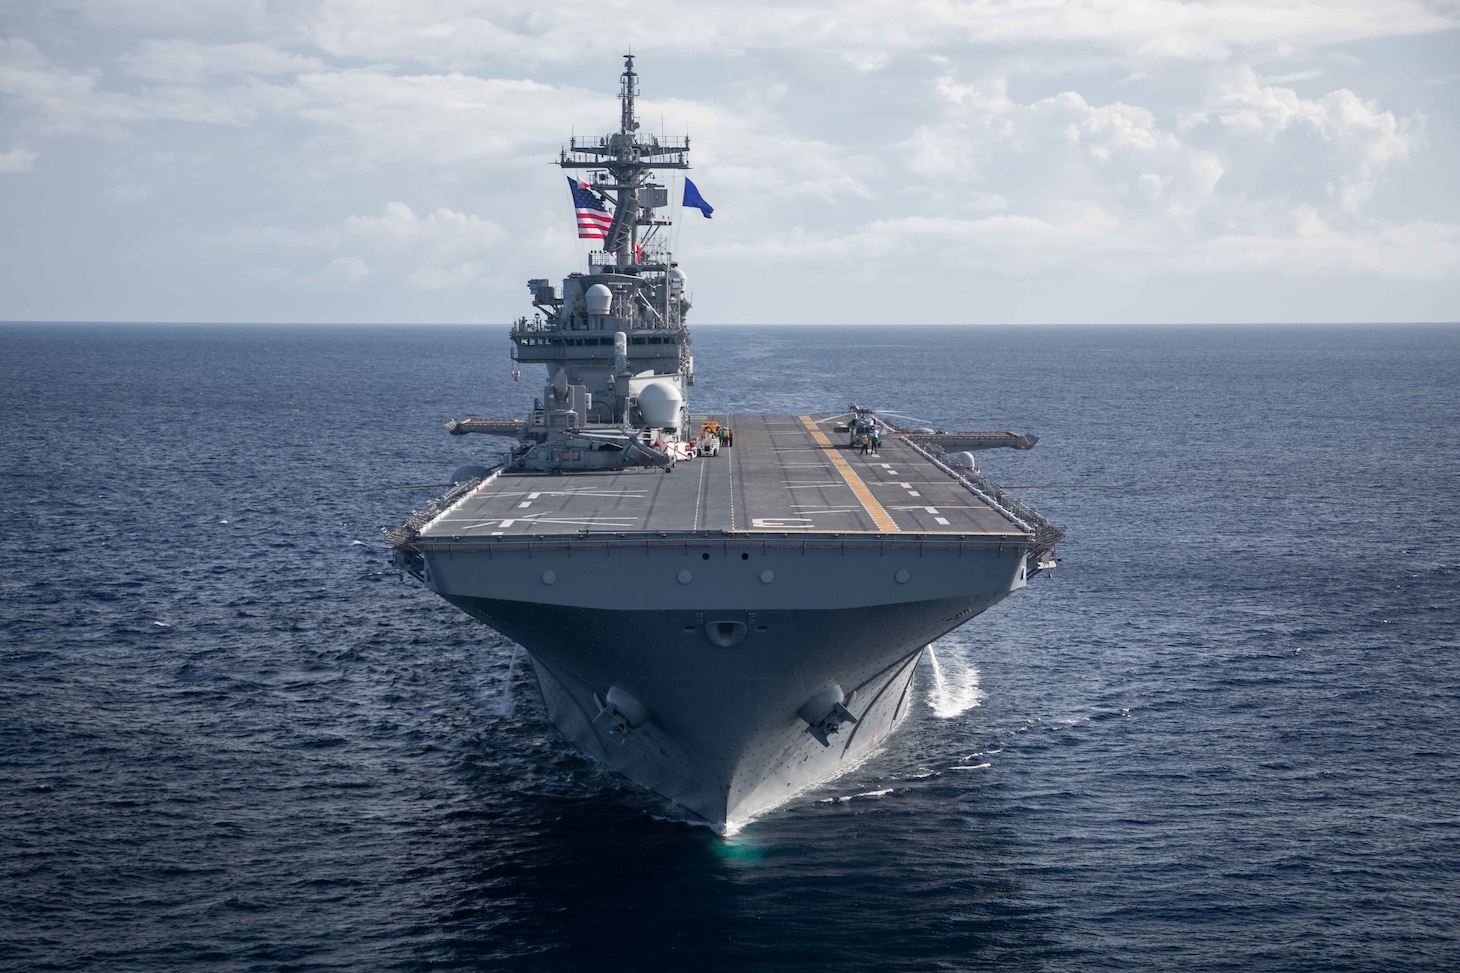 The Wasp-class amphibious assault ship USS Kearsarge transits the Atlantic Ocean (LHD 3) Aug. 14, 2021. Kearsarge was underway to support Large Scale Exercise (LSE) 2021.